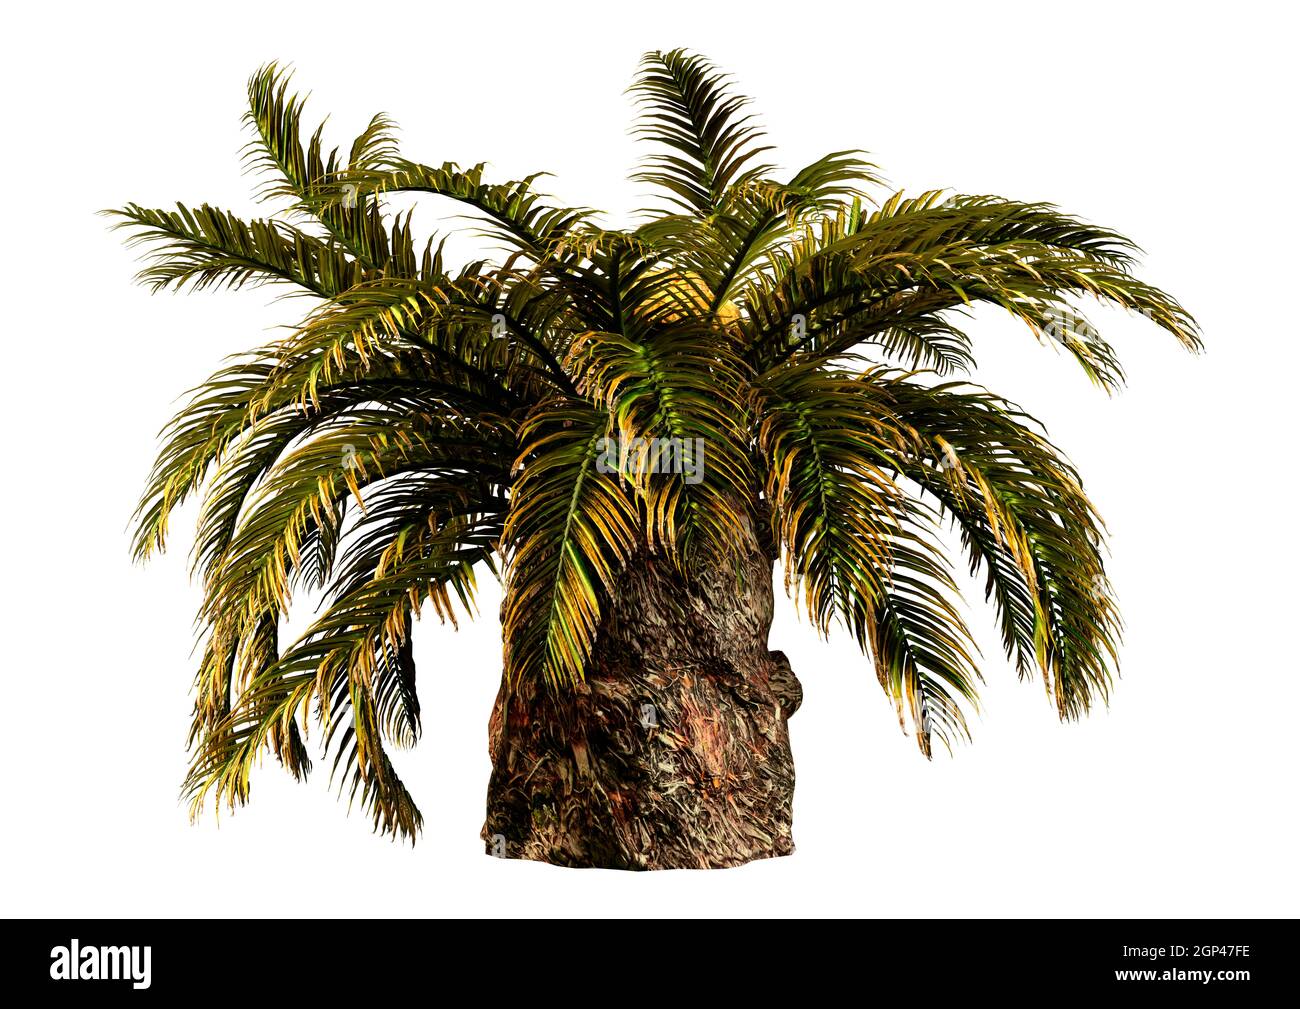 3D rendering of a sago palm tree or Metroxylon sagu  isolated on white background Stock Photo